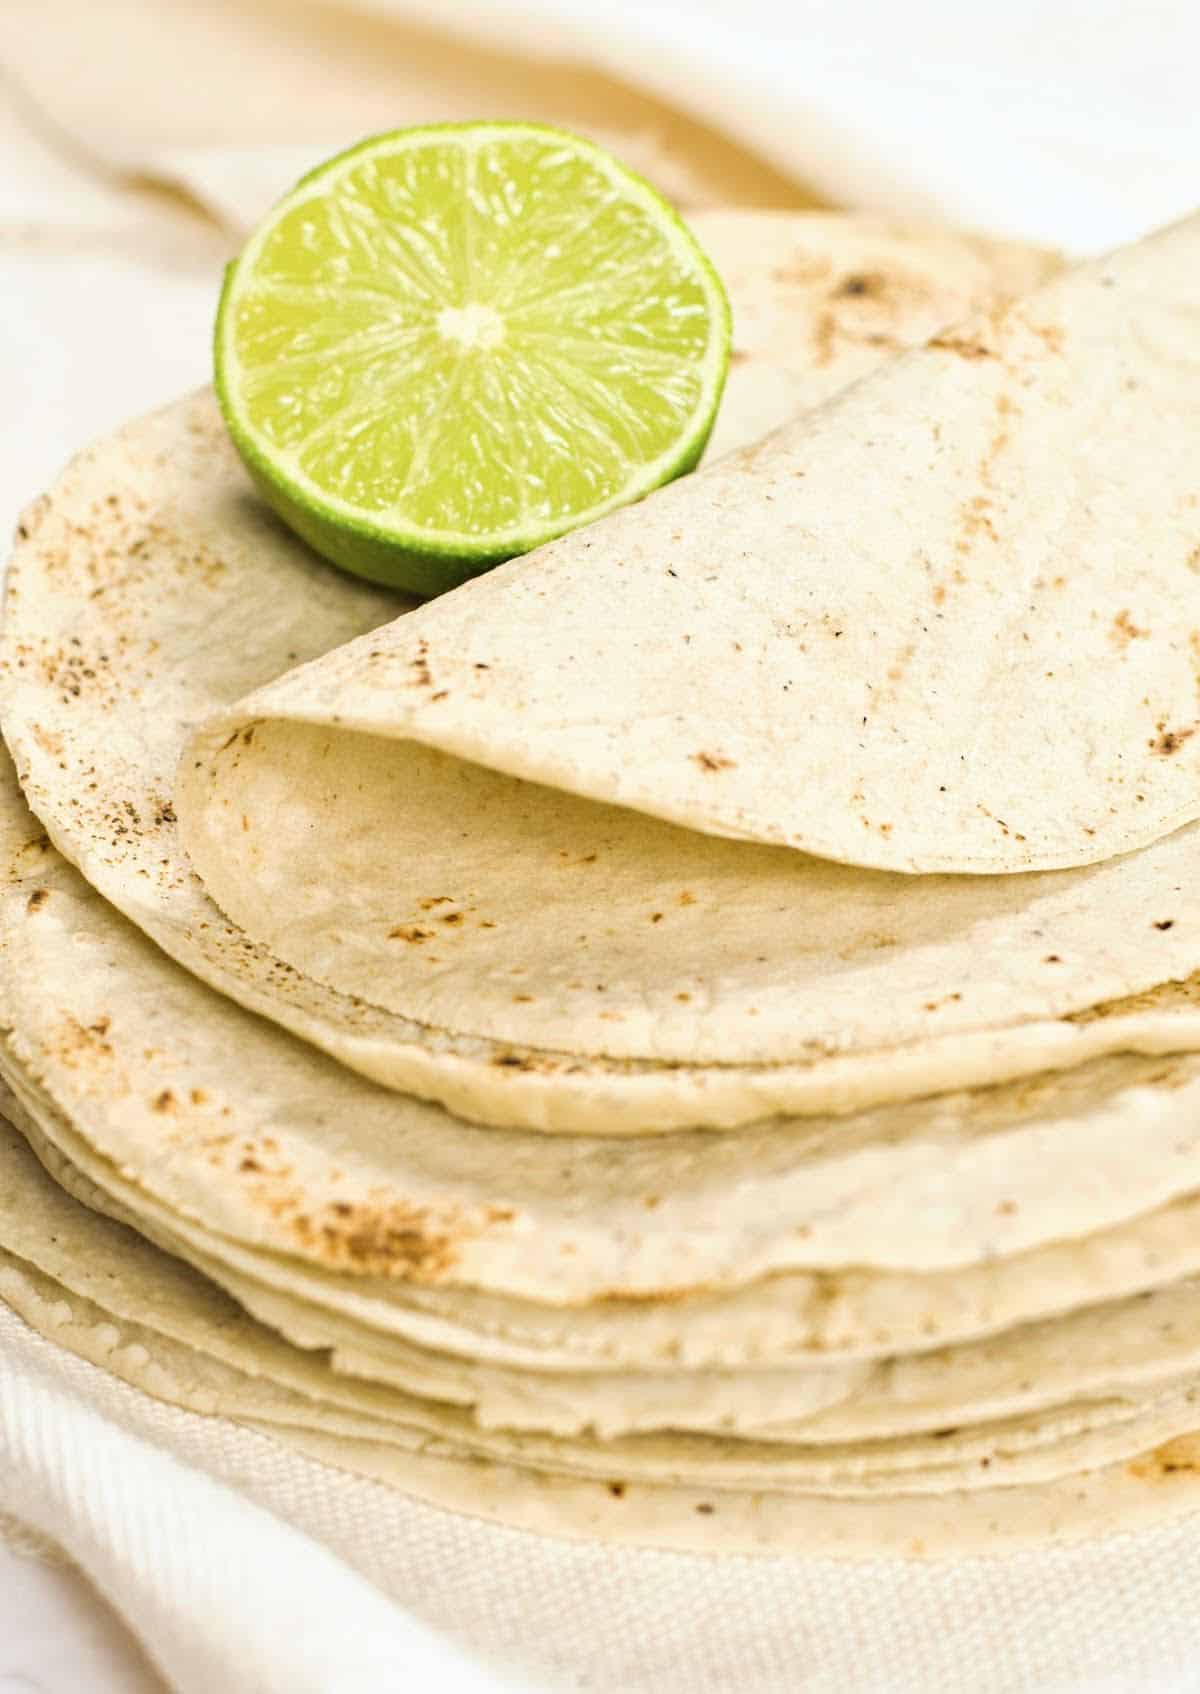 Stack of corn tortillas with half a lime and top one folded. White background. 